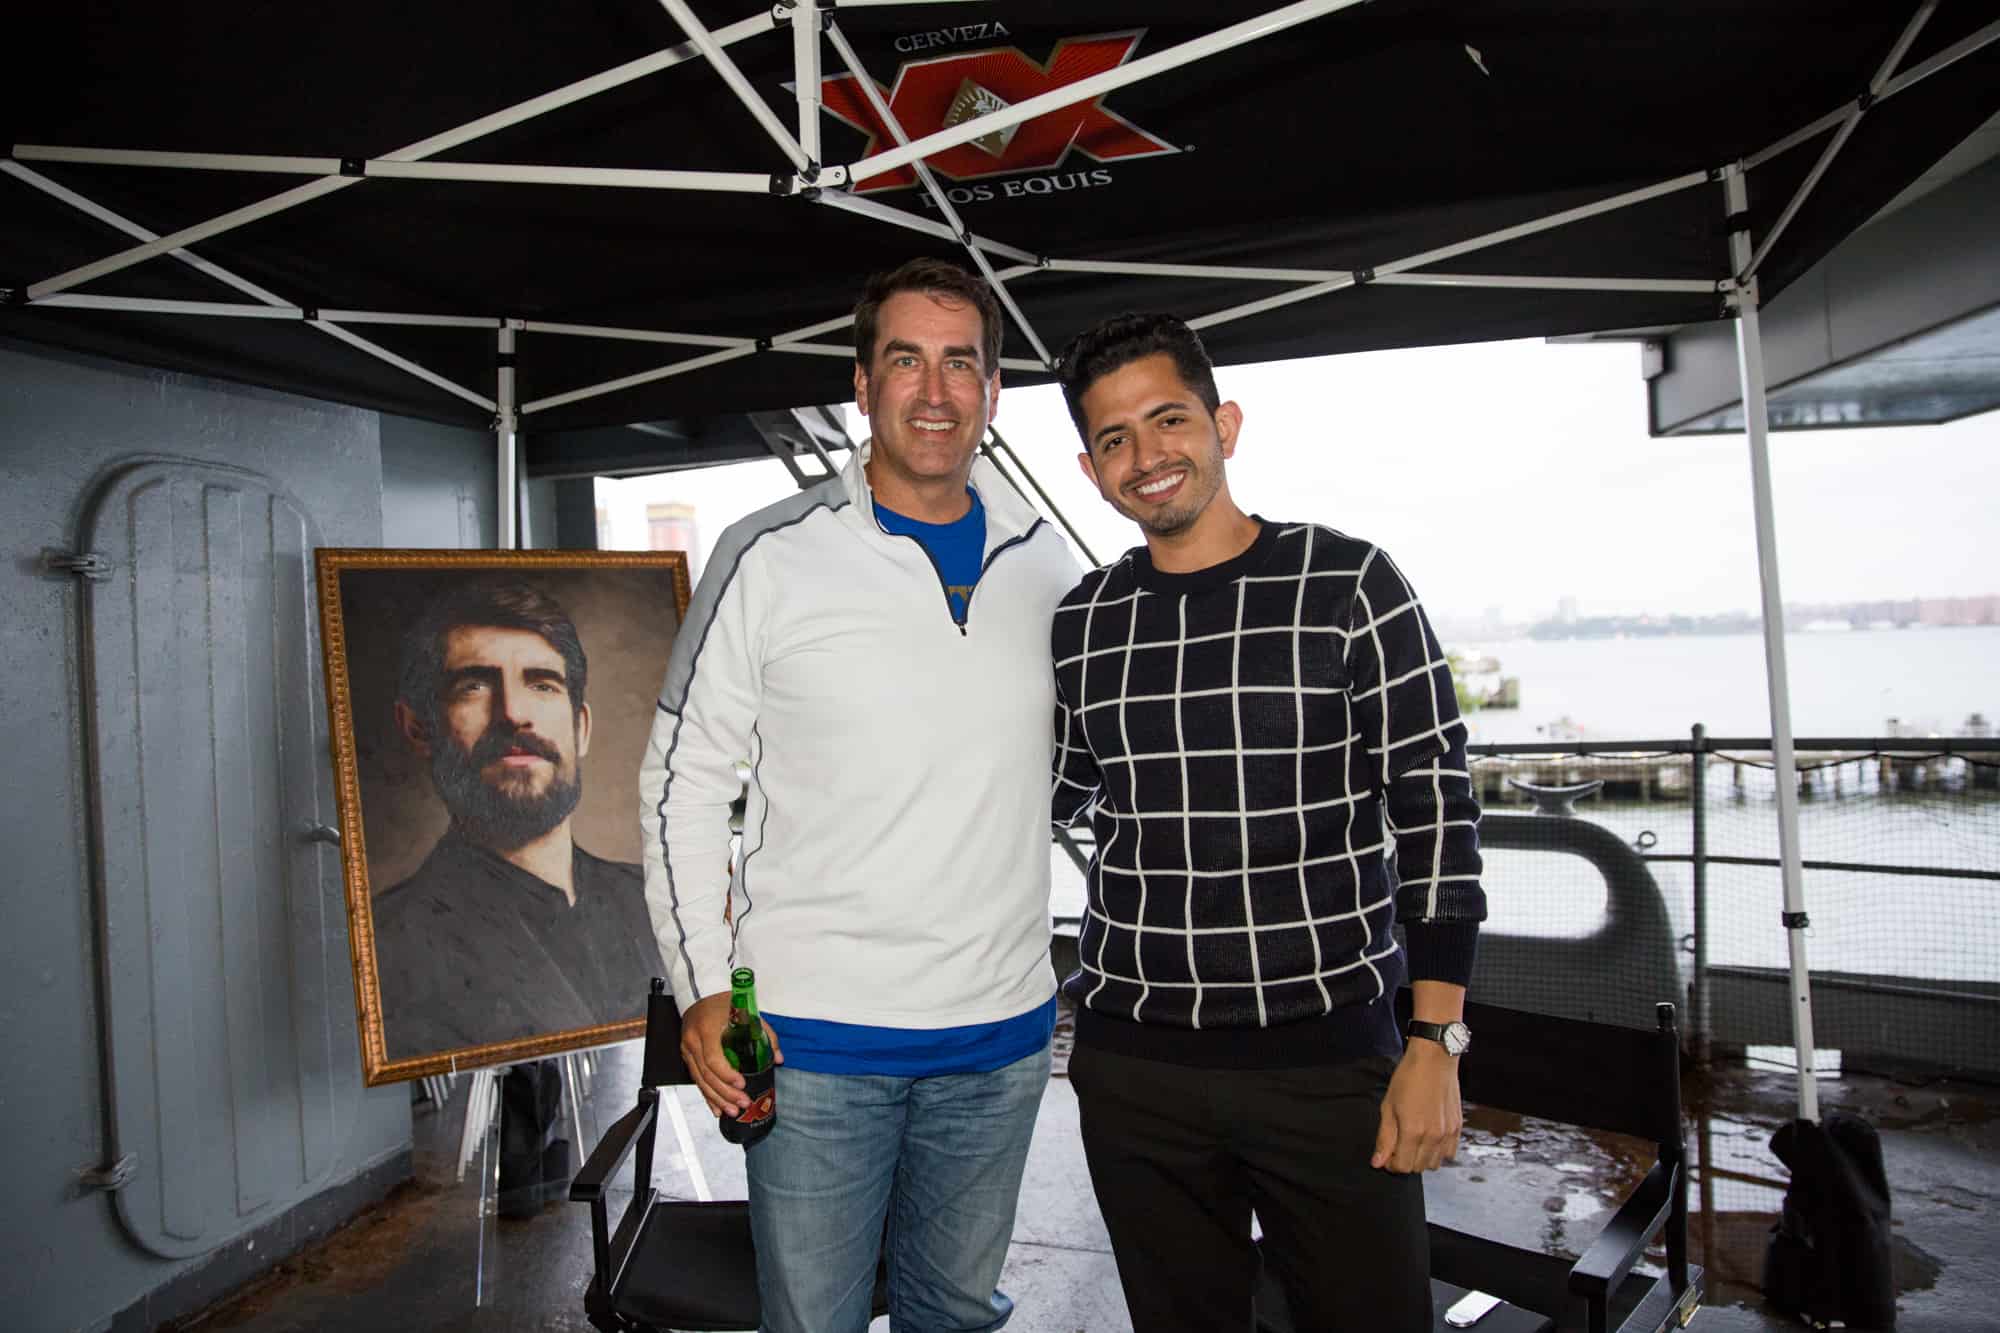 Actor and Comedian Rob Riggle with MAN'edged Media Founder Michael William G.